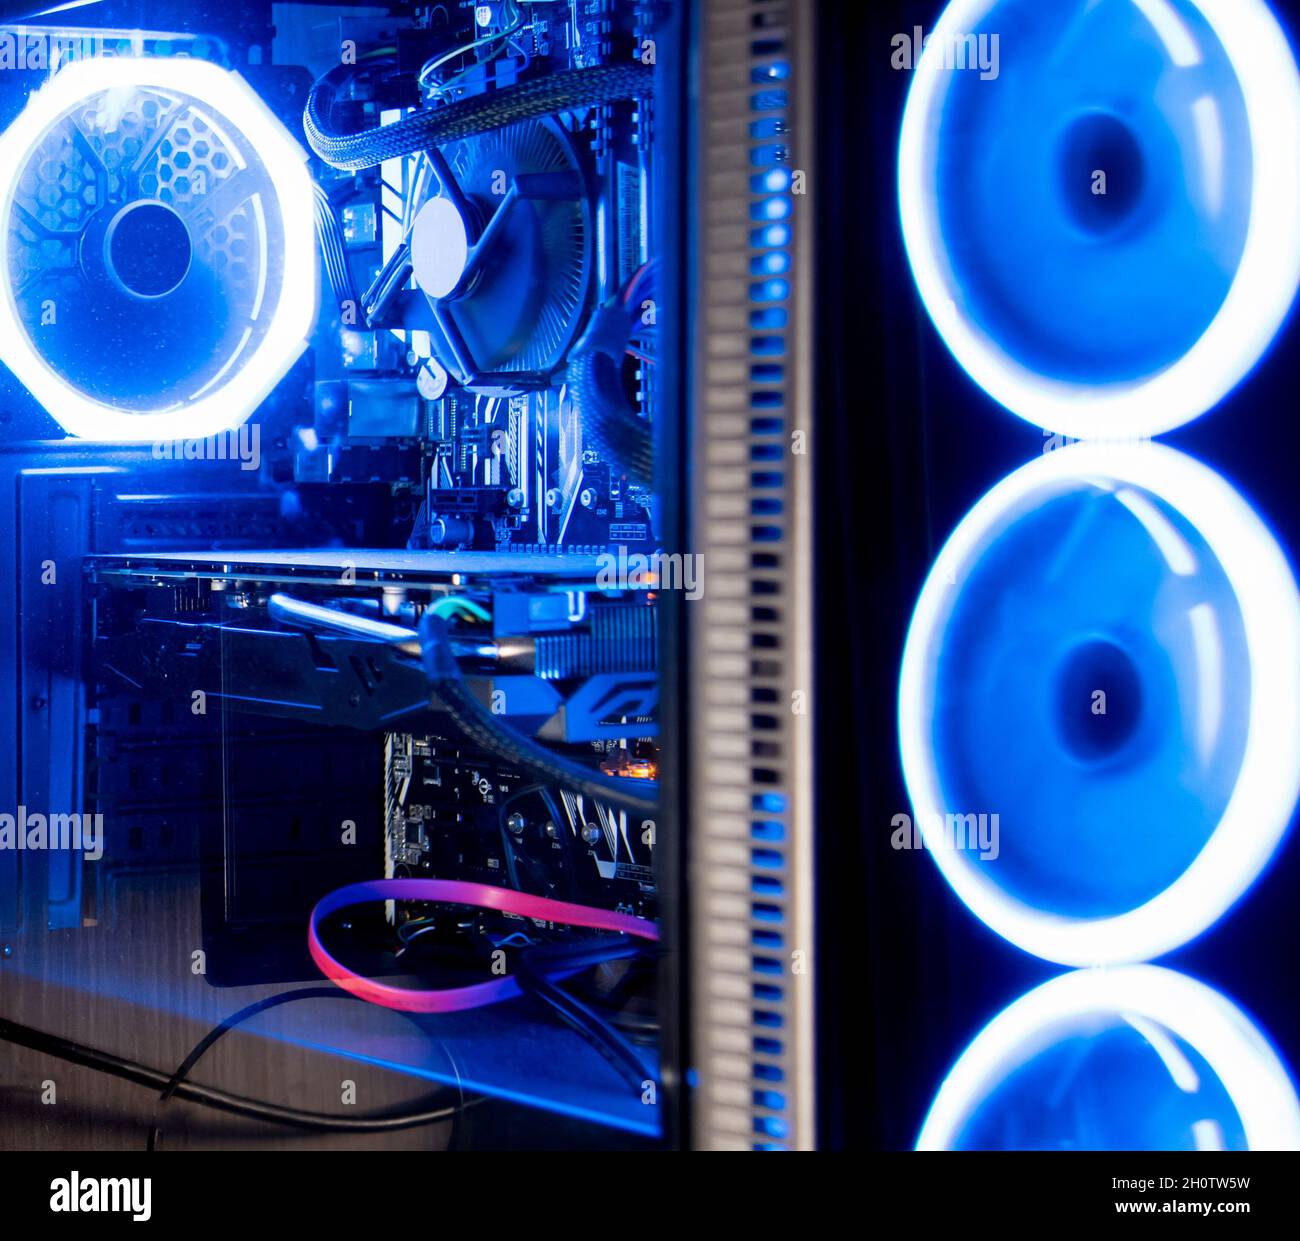 View of blue neon light of a pc case at night Stock Photo - Alamy